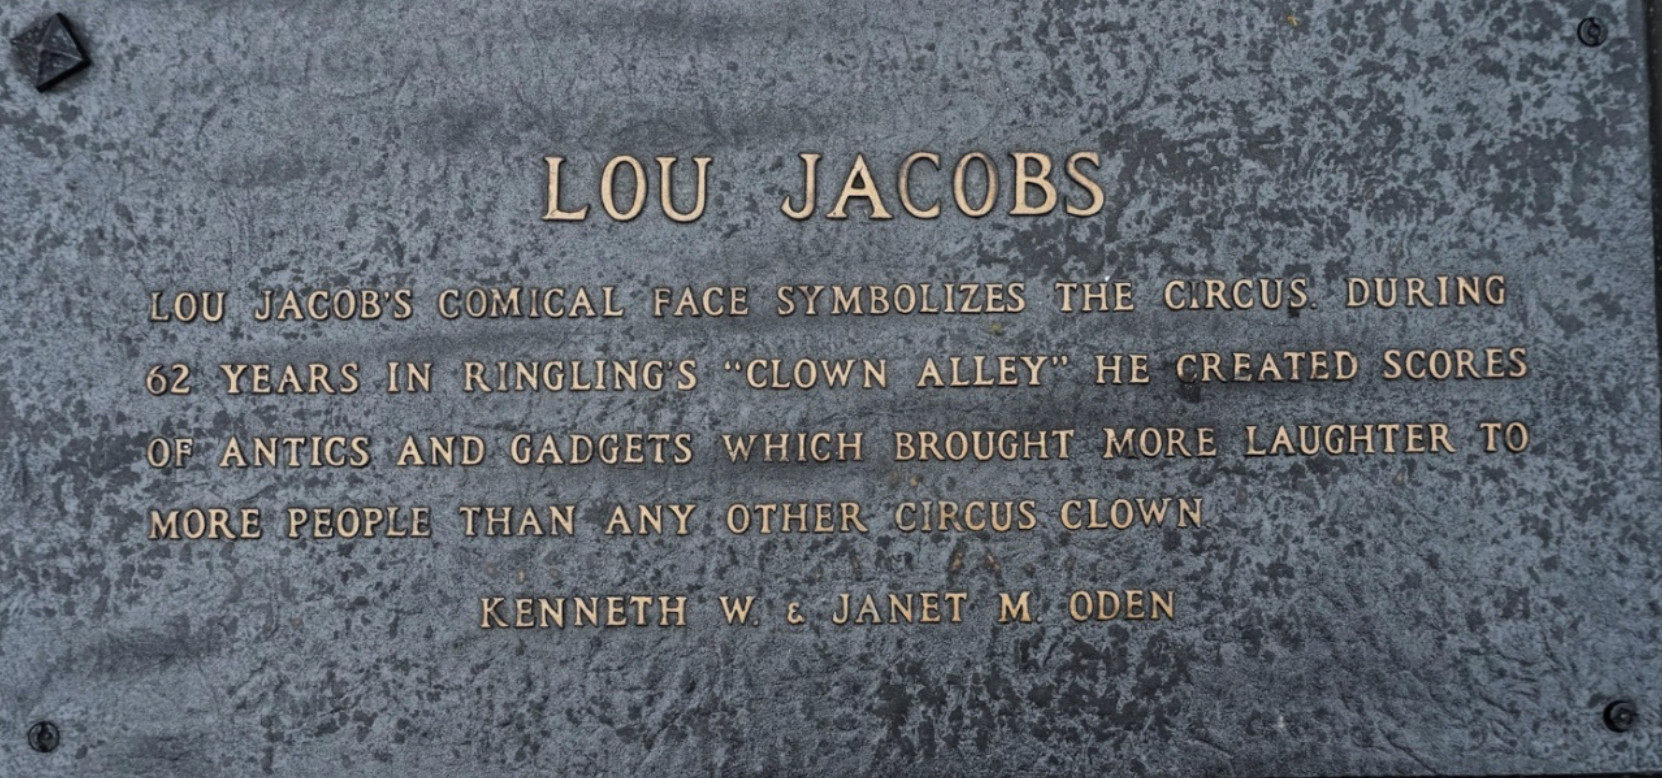 Lou Jacobs Circus Ring Of Fame Foundation inductee plaque